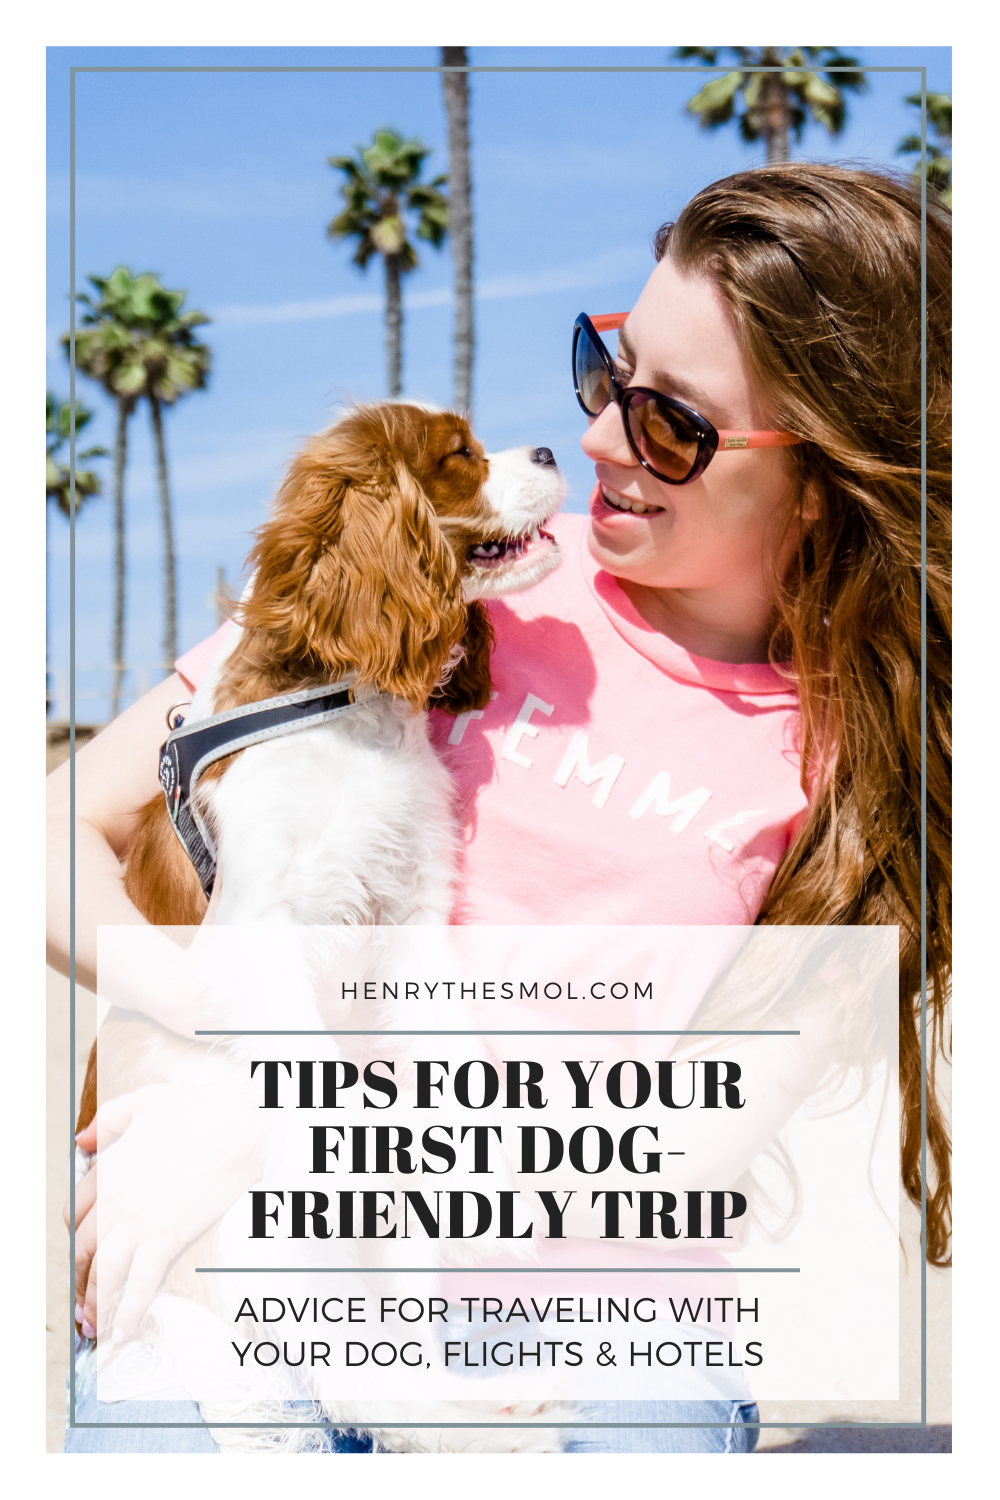 Tips for Traveling With Your Dog For The First Time